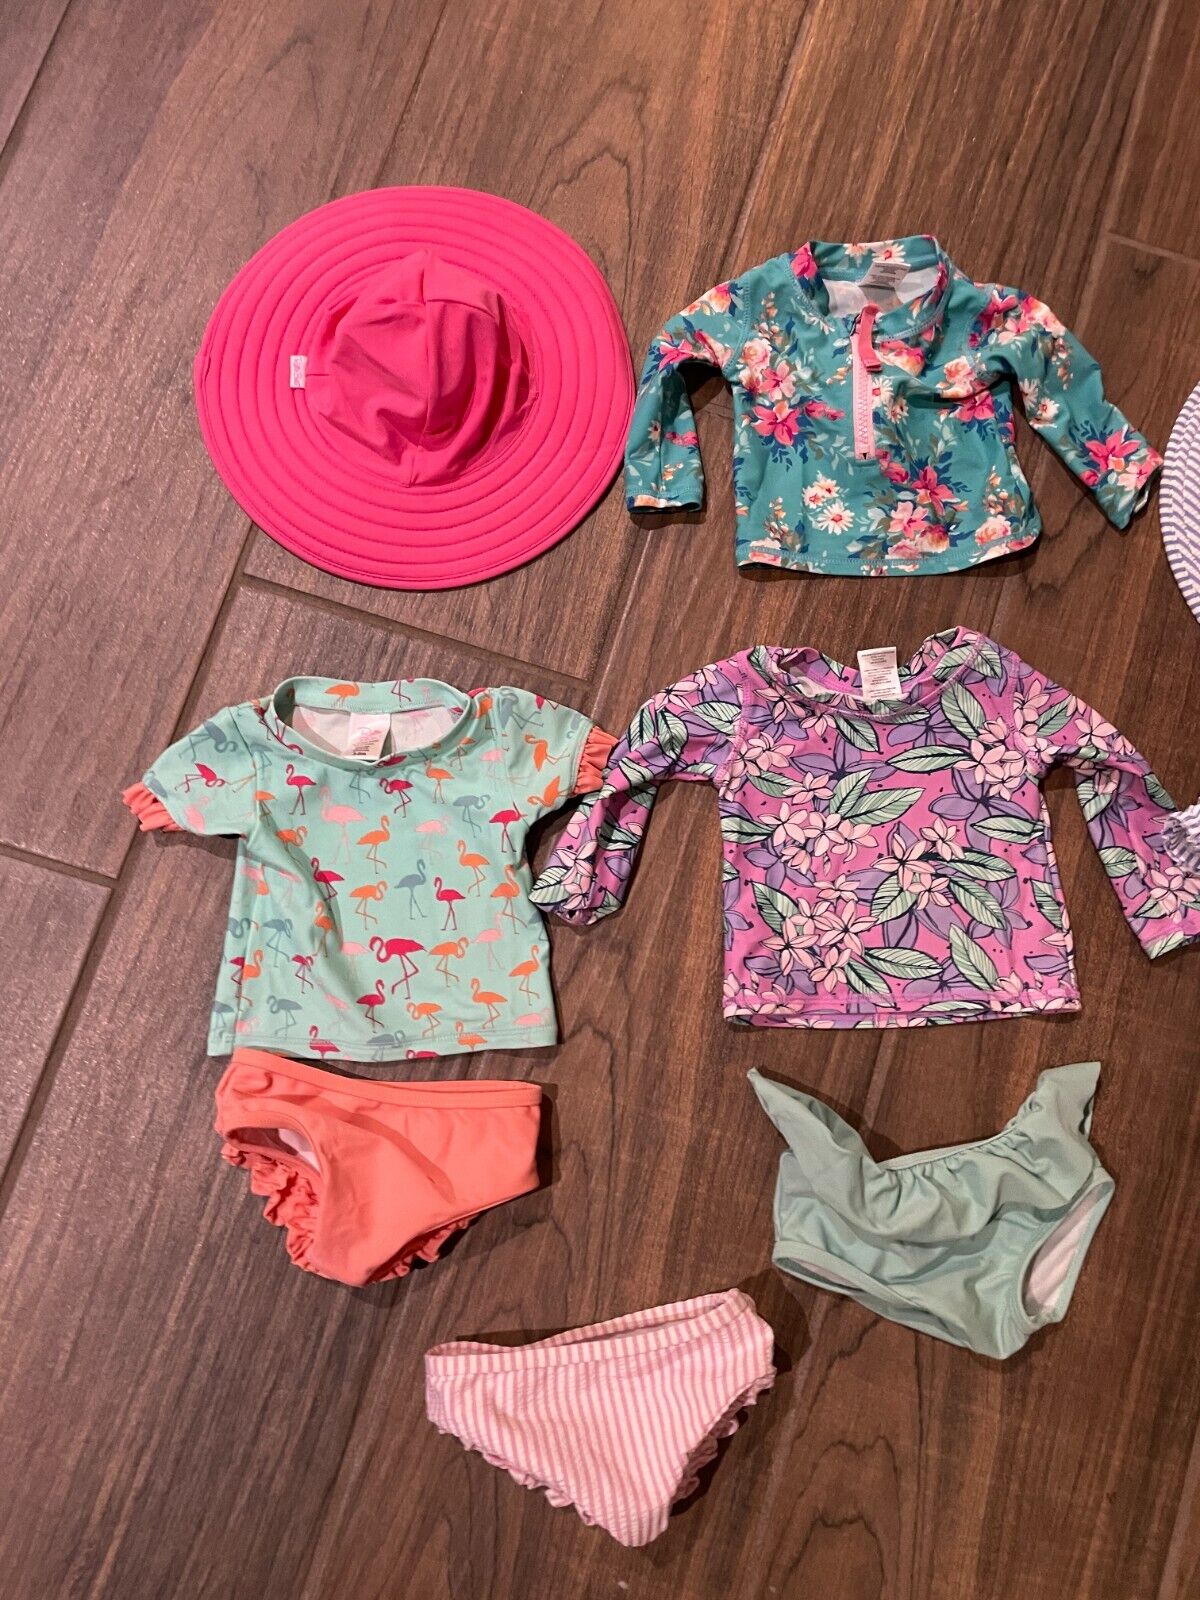 Mixed Lot Ruffle Butts 0-12M Toddler Swimwear Striped Floral Summer Outfits